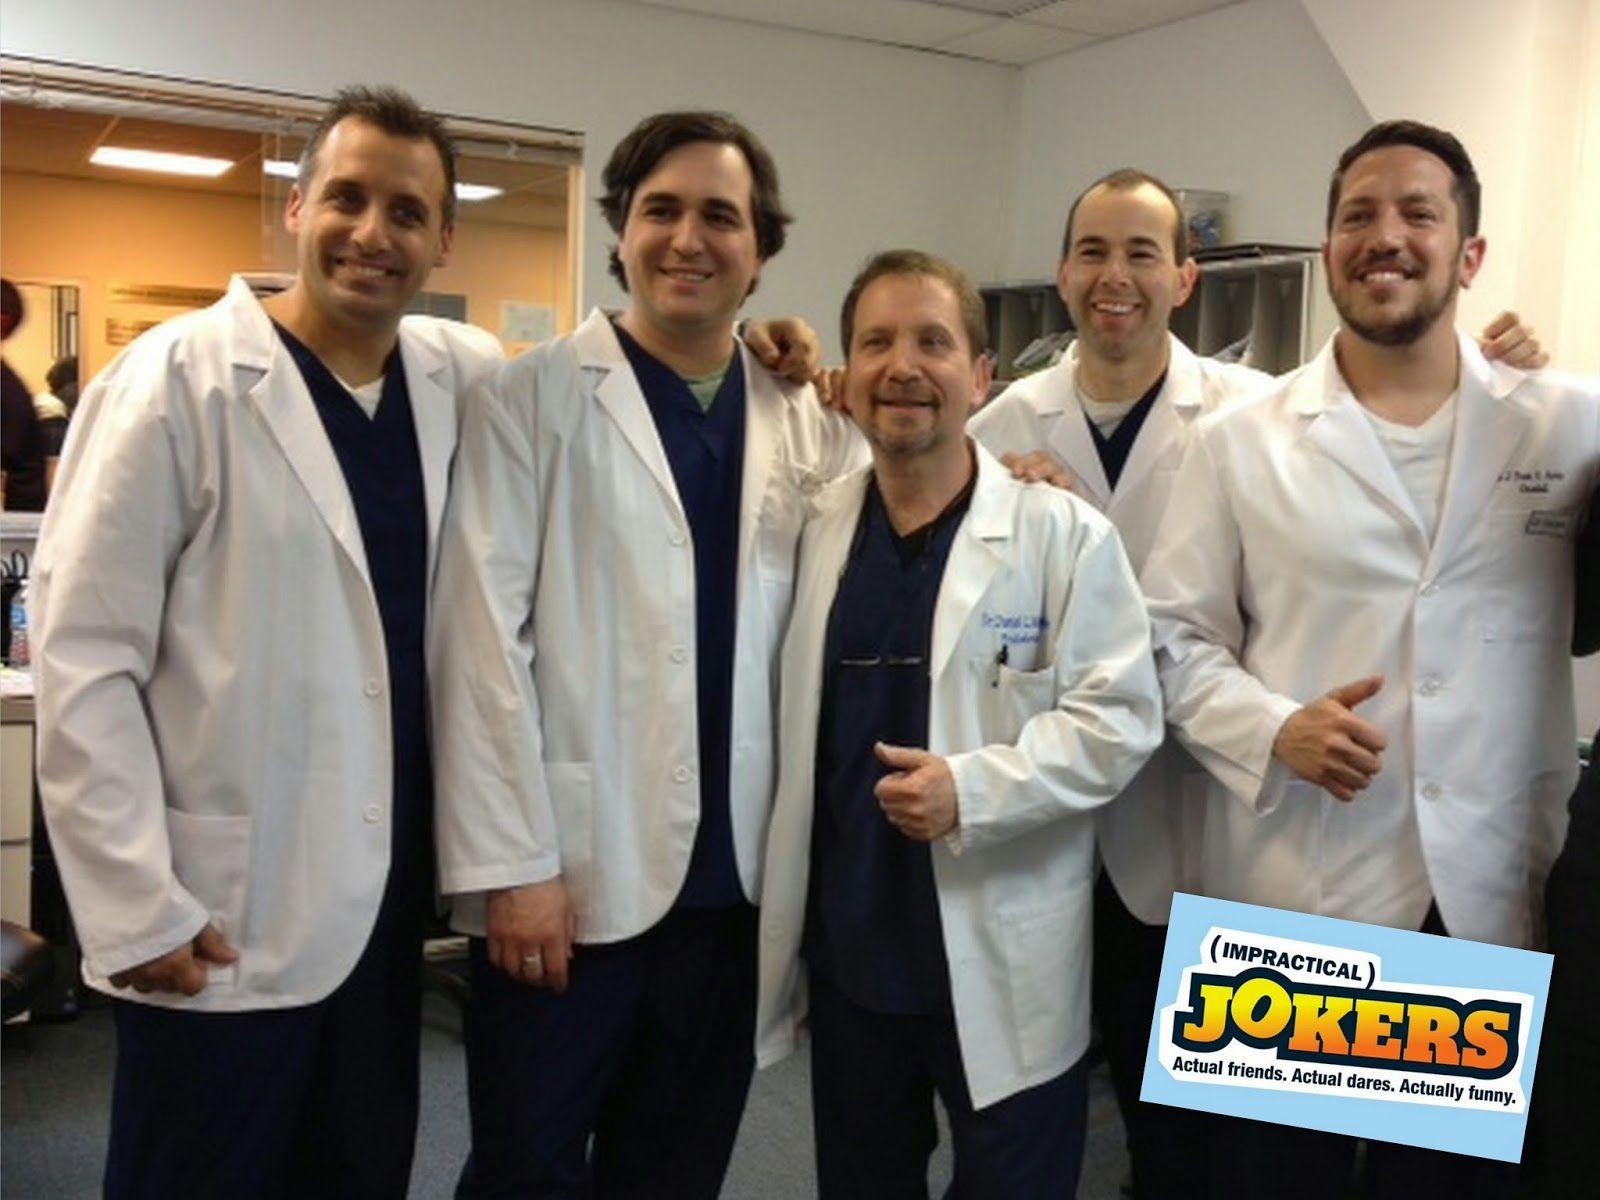 Footprints: New Jersey Foot and Ankle Center: Impractical Jokers